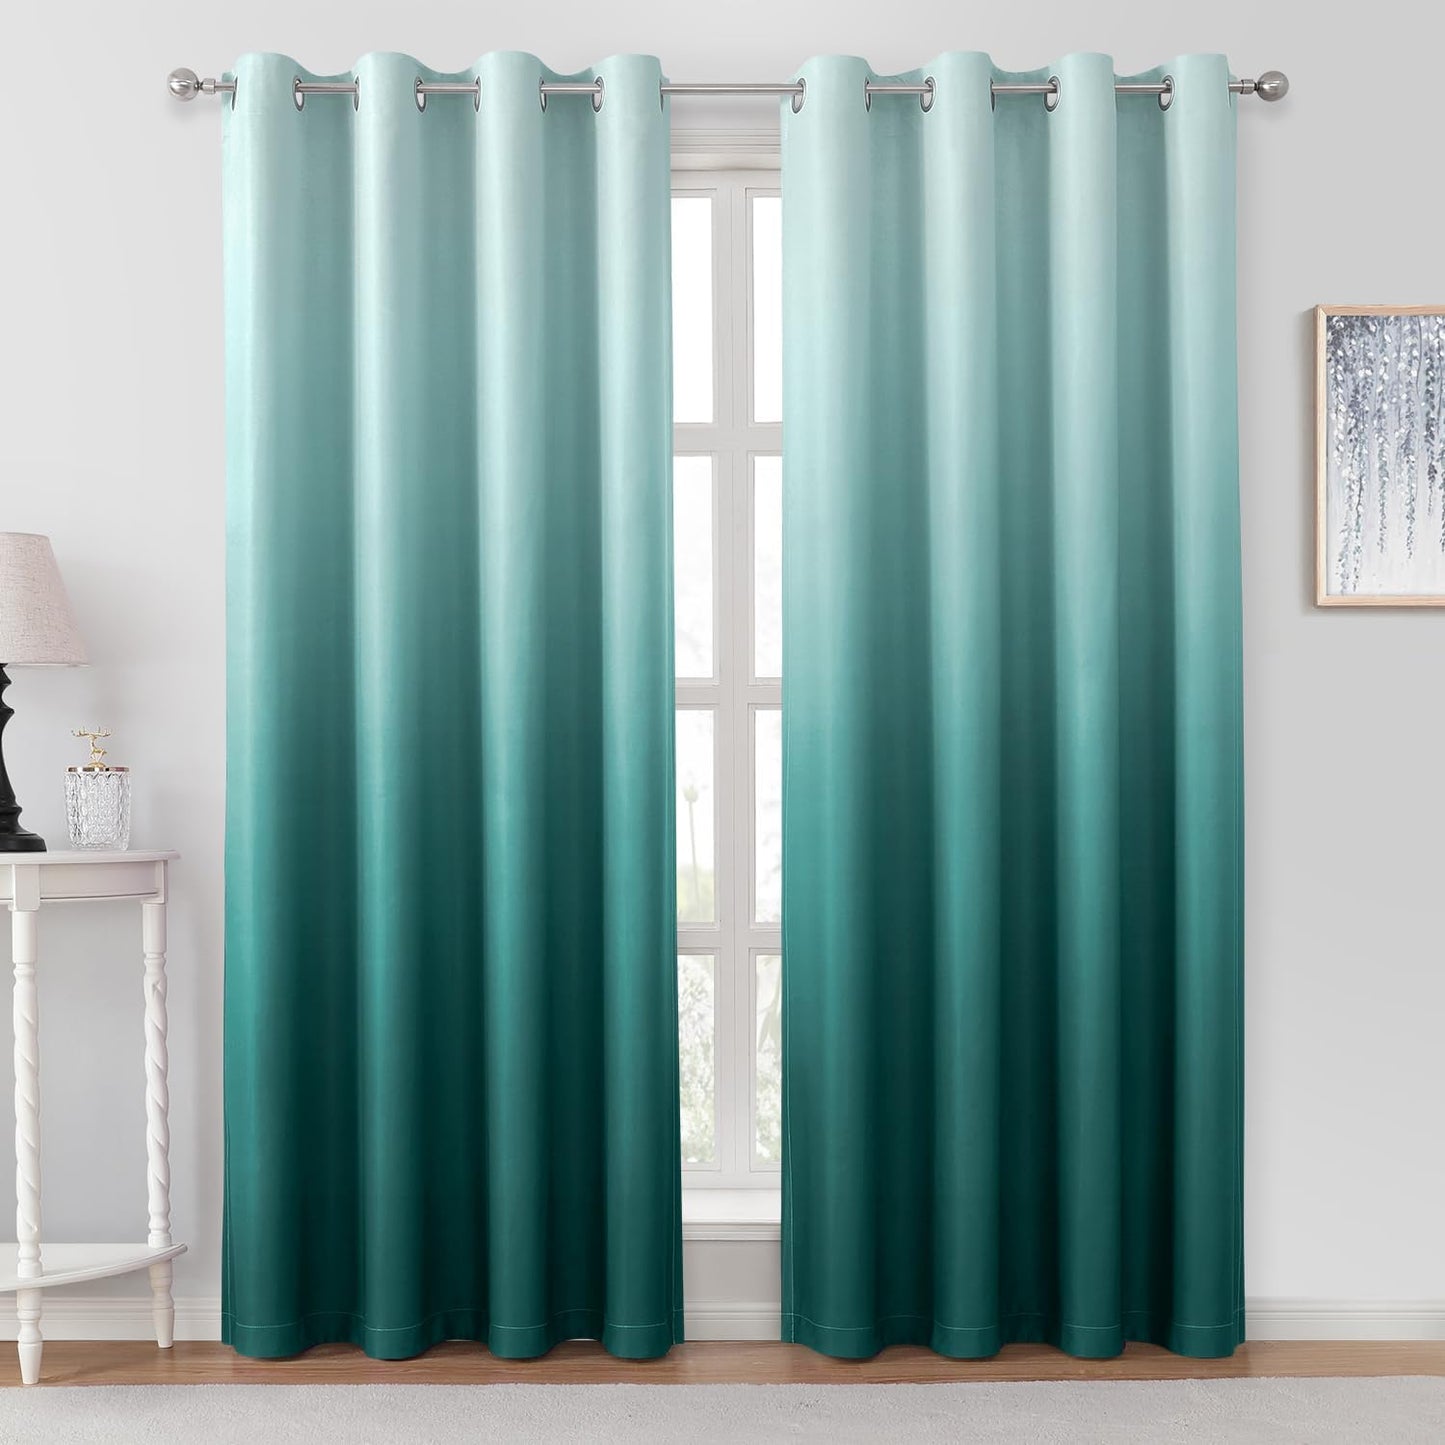 HOMEIDEAS Navy Blue Ombre Blackout Curtains 52 X 84 Inch Length Gradient Room Darkening Thermal Insulated Energy Saving Grommet 2 Panels Window Drapes for Living Room/Bedroom  HOMEIDEAS Teal 52"W X 96"L 